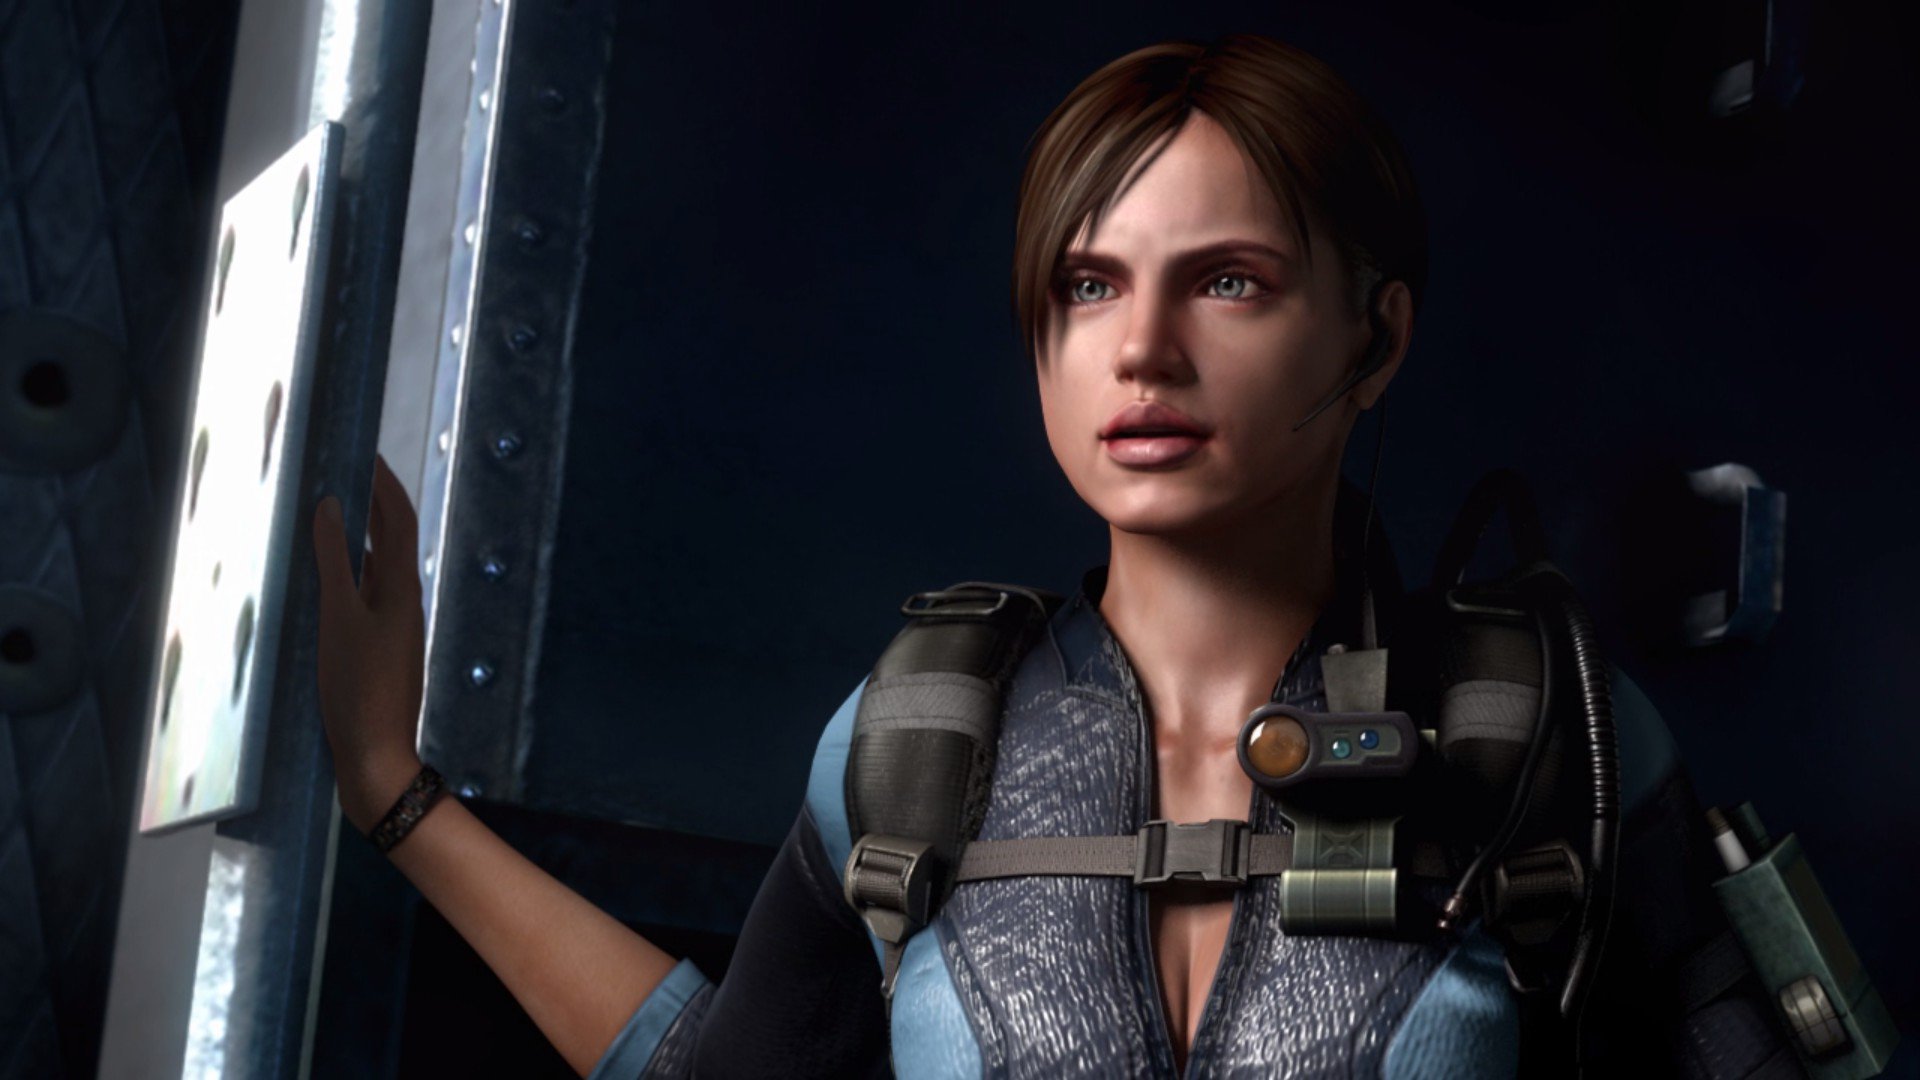 Jill Valentine  Resident Evil Revelations by Twisted4000 on